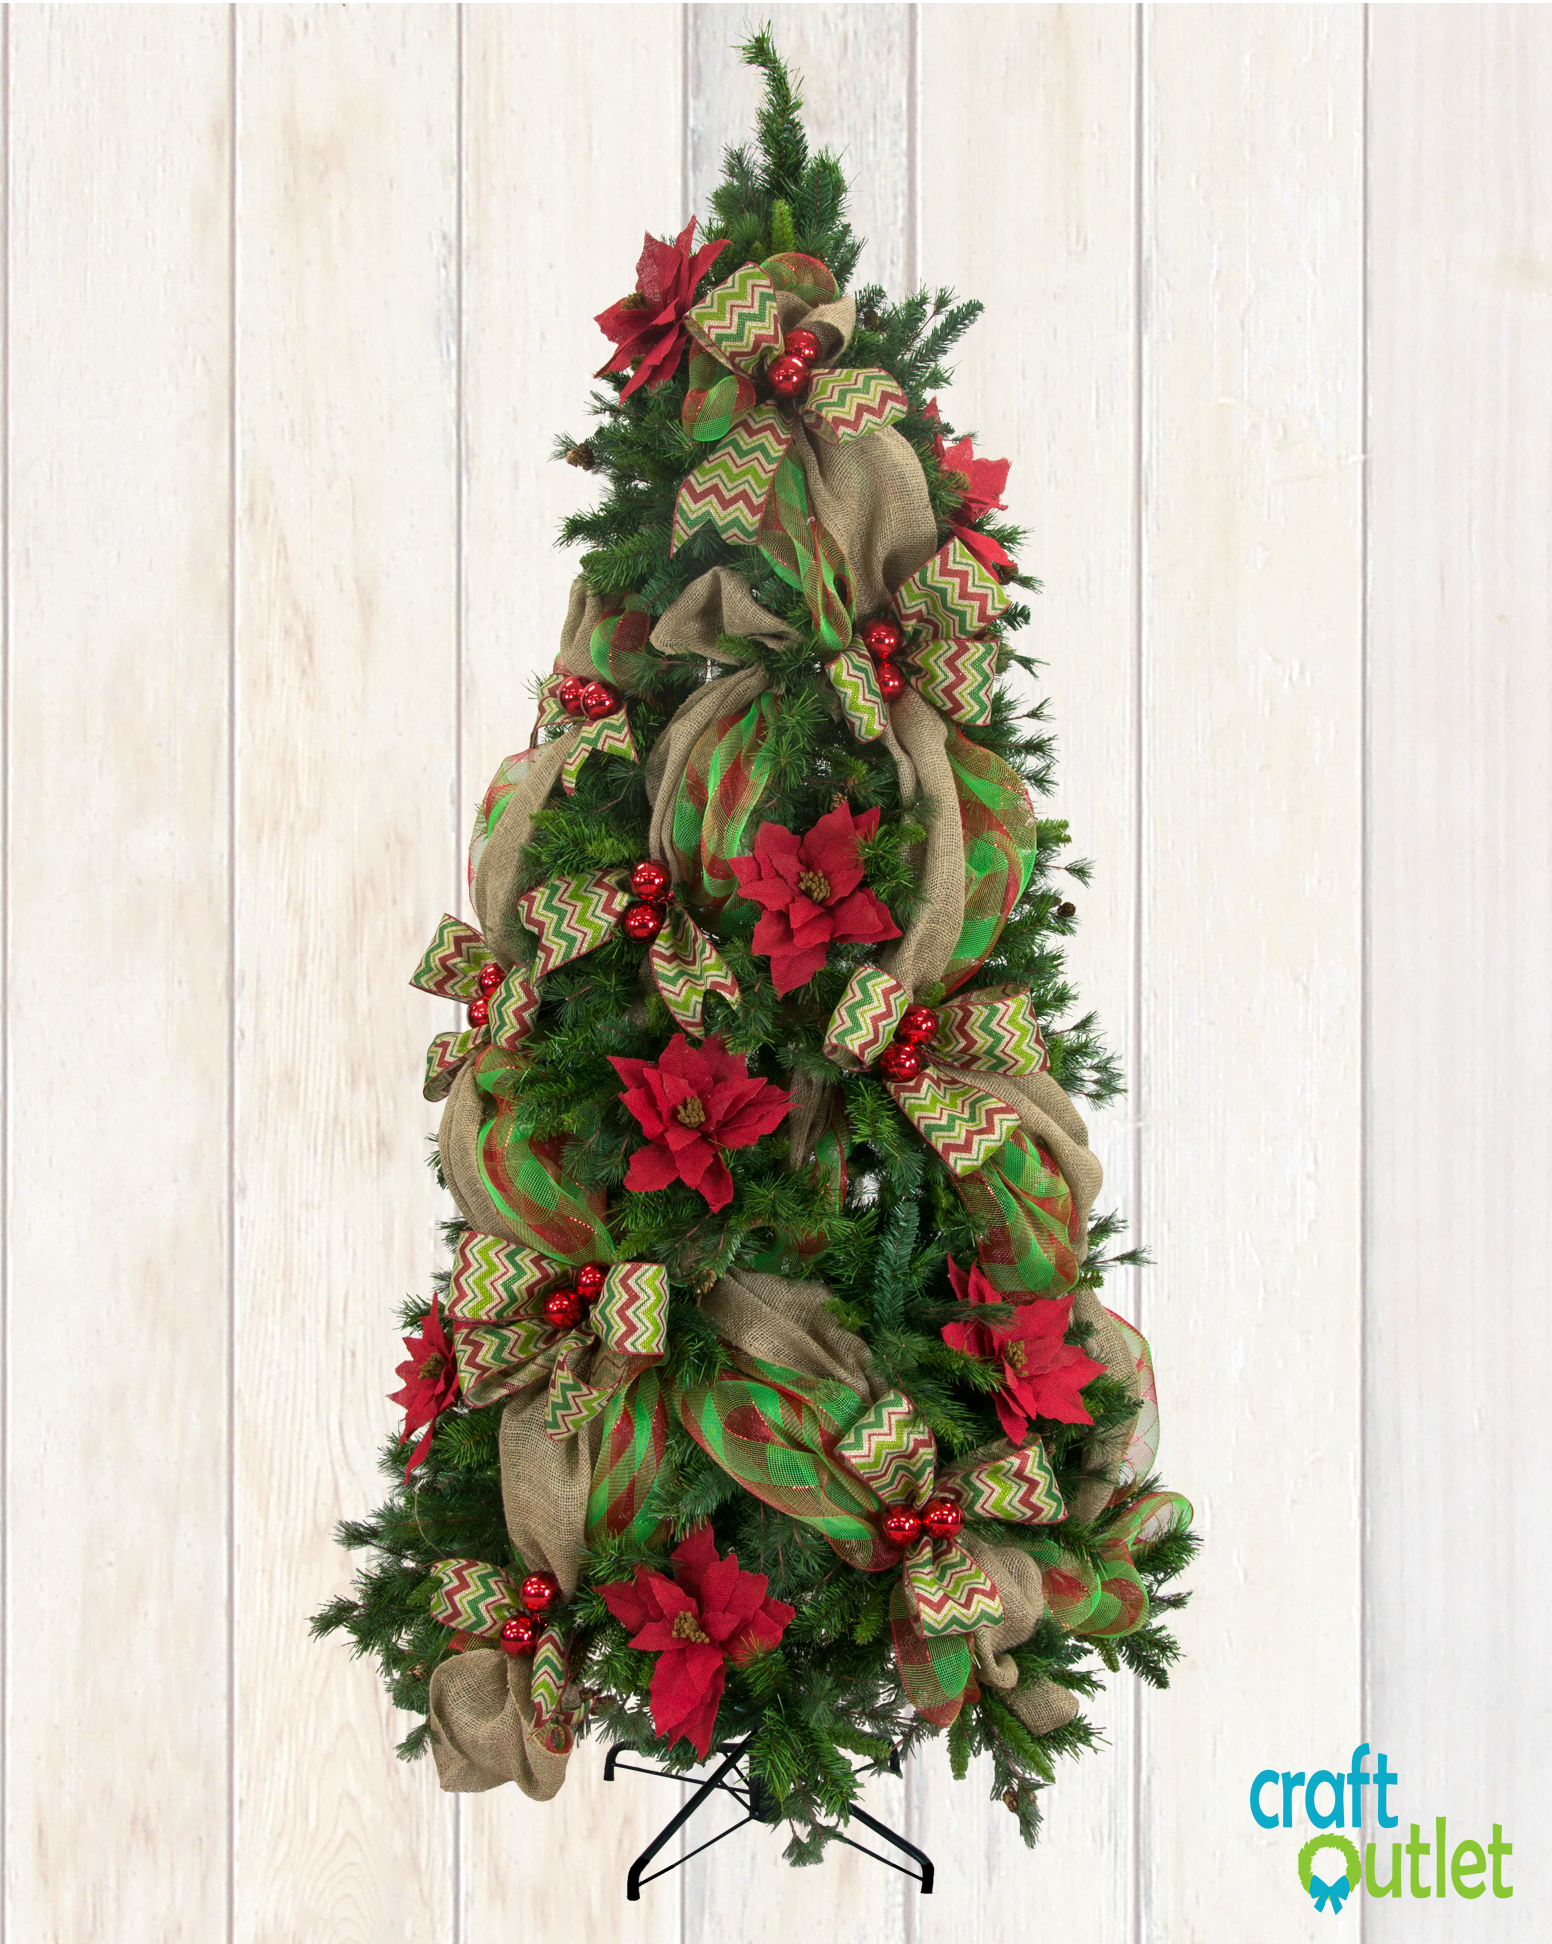 Christmas Tree Decorating with Burlap and Deco Mesh – Craft Outlet / inspiration